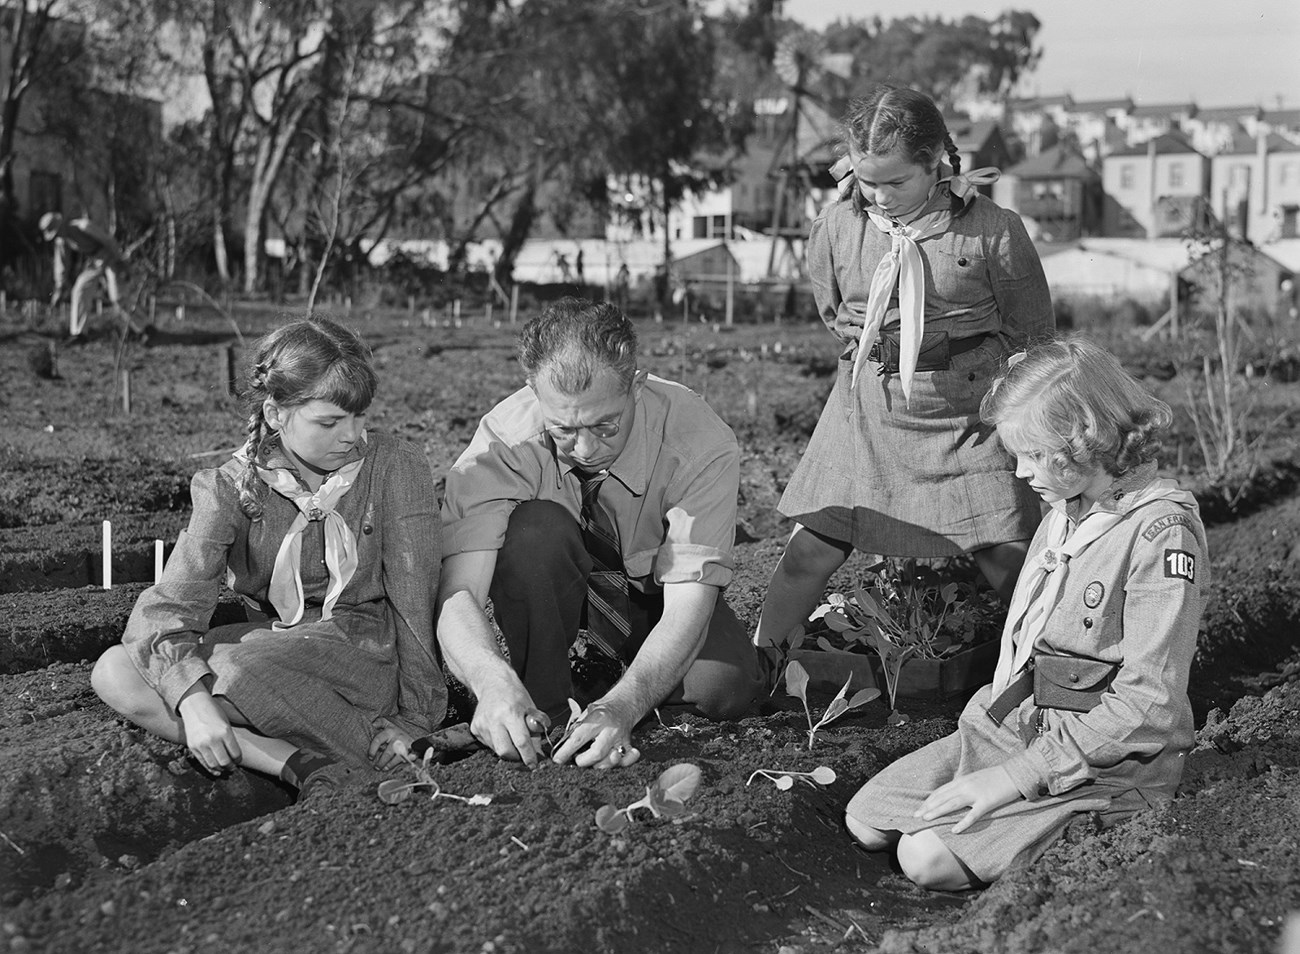 Black and white photo of a white man in a tie kneeling in a garden with plants. Three white girls in Girl Scout uniforms look on.